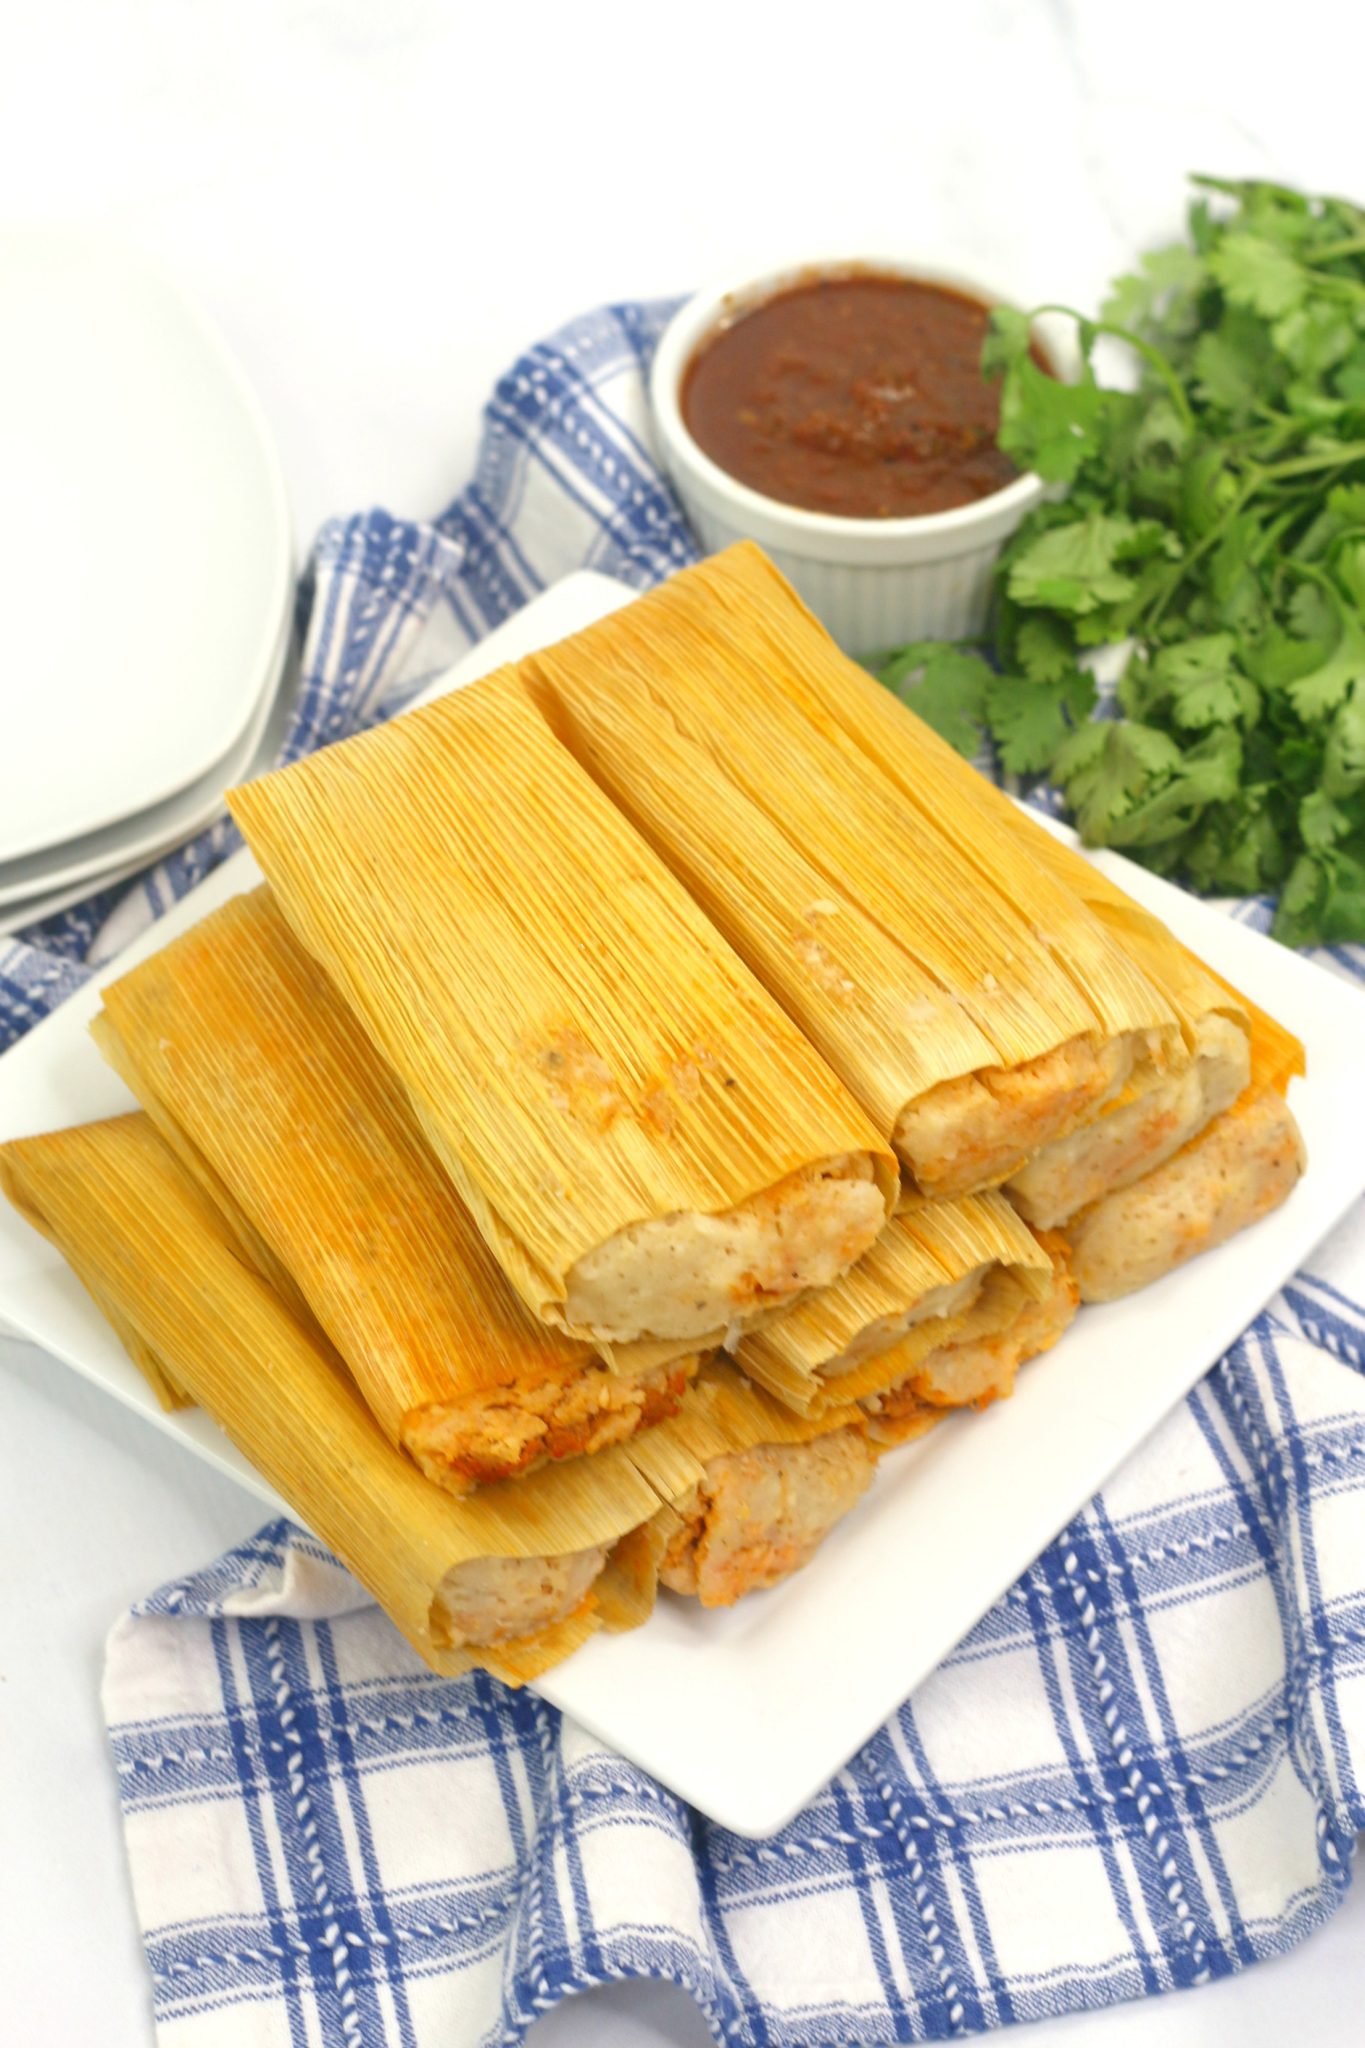 How To Make Mexican Pork Tamales - 4 Sons 'R' Us